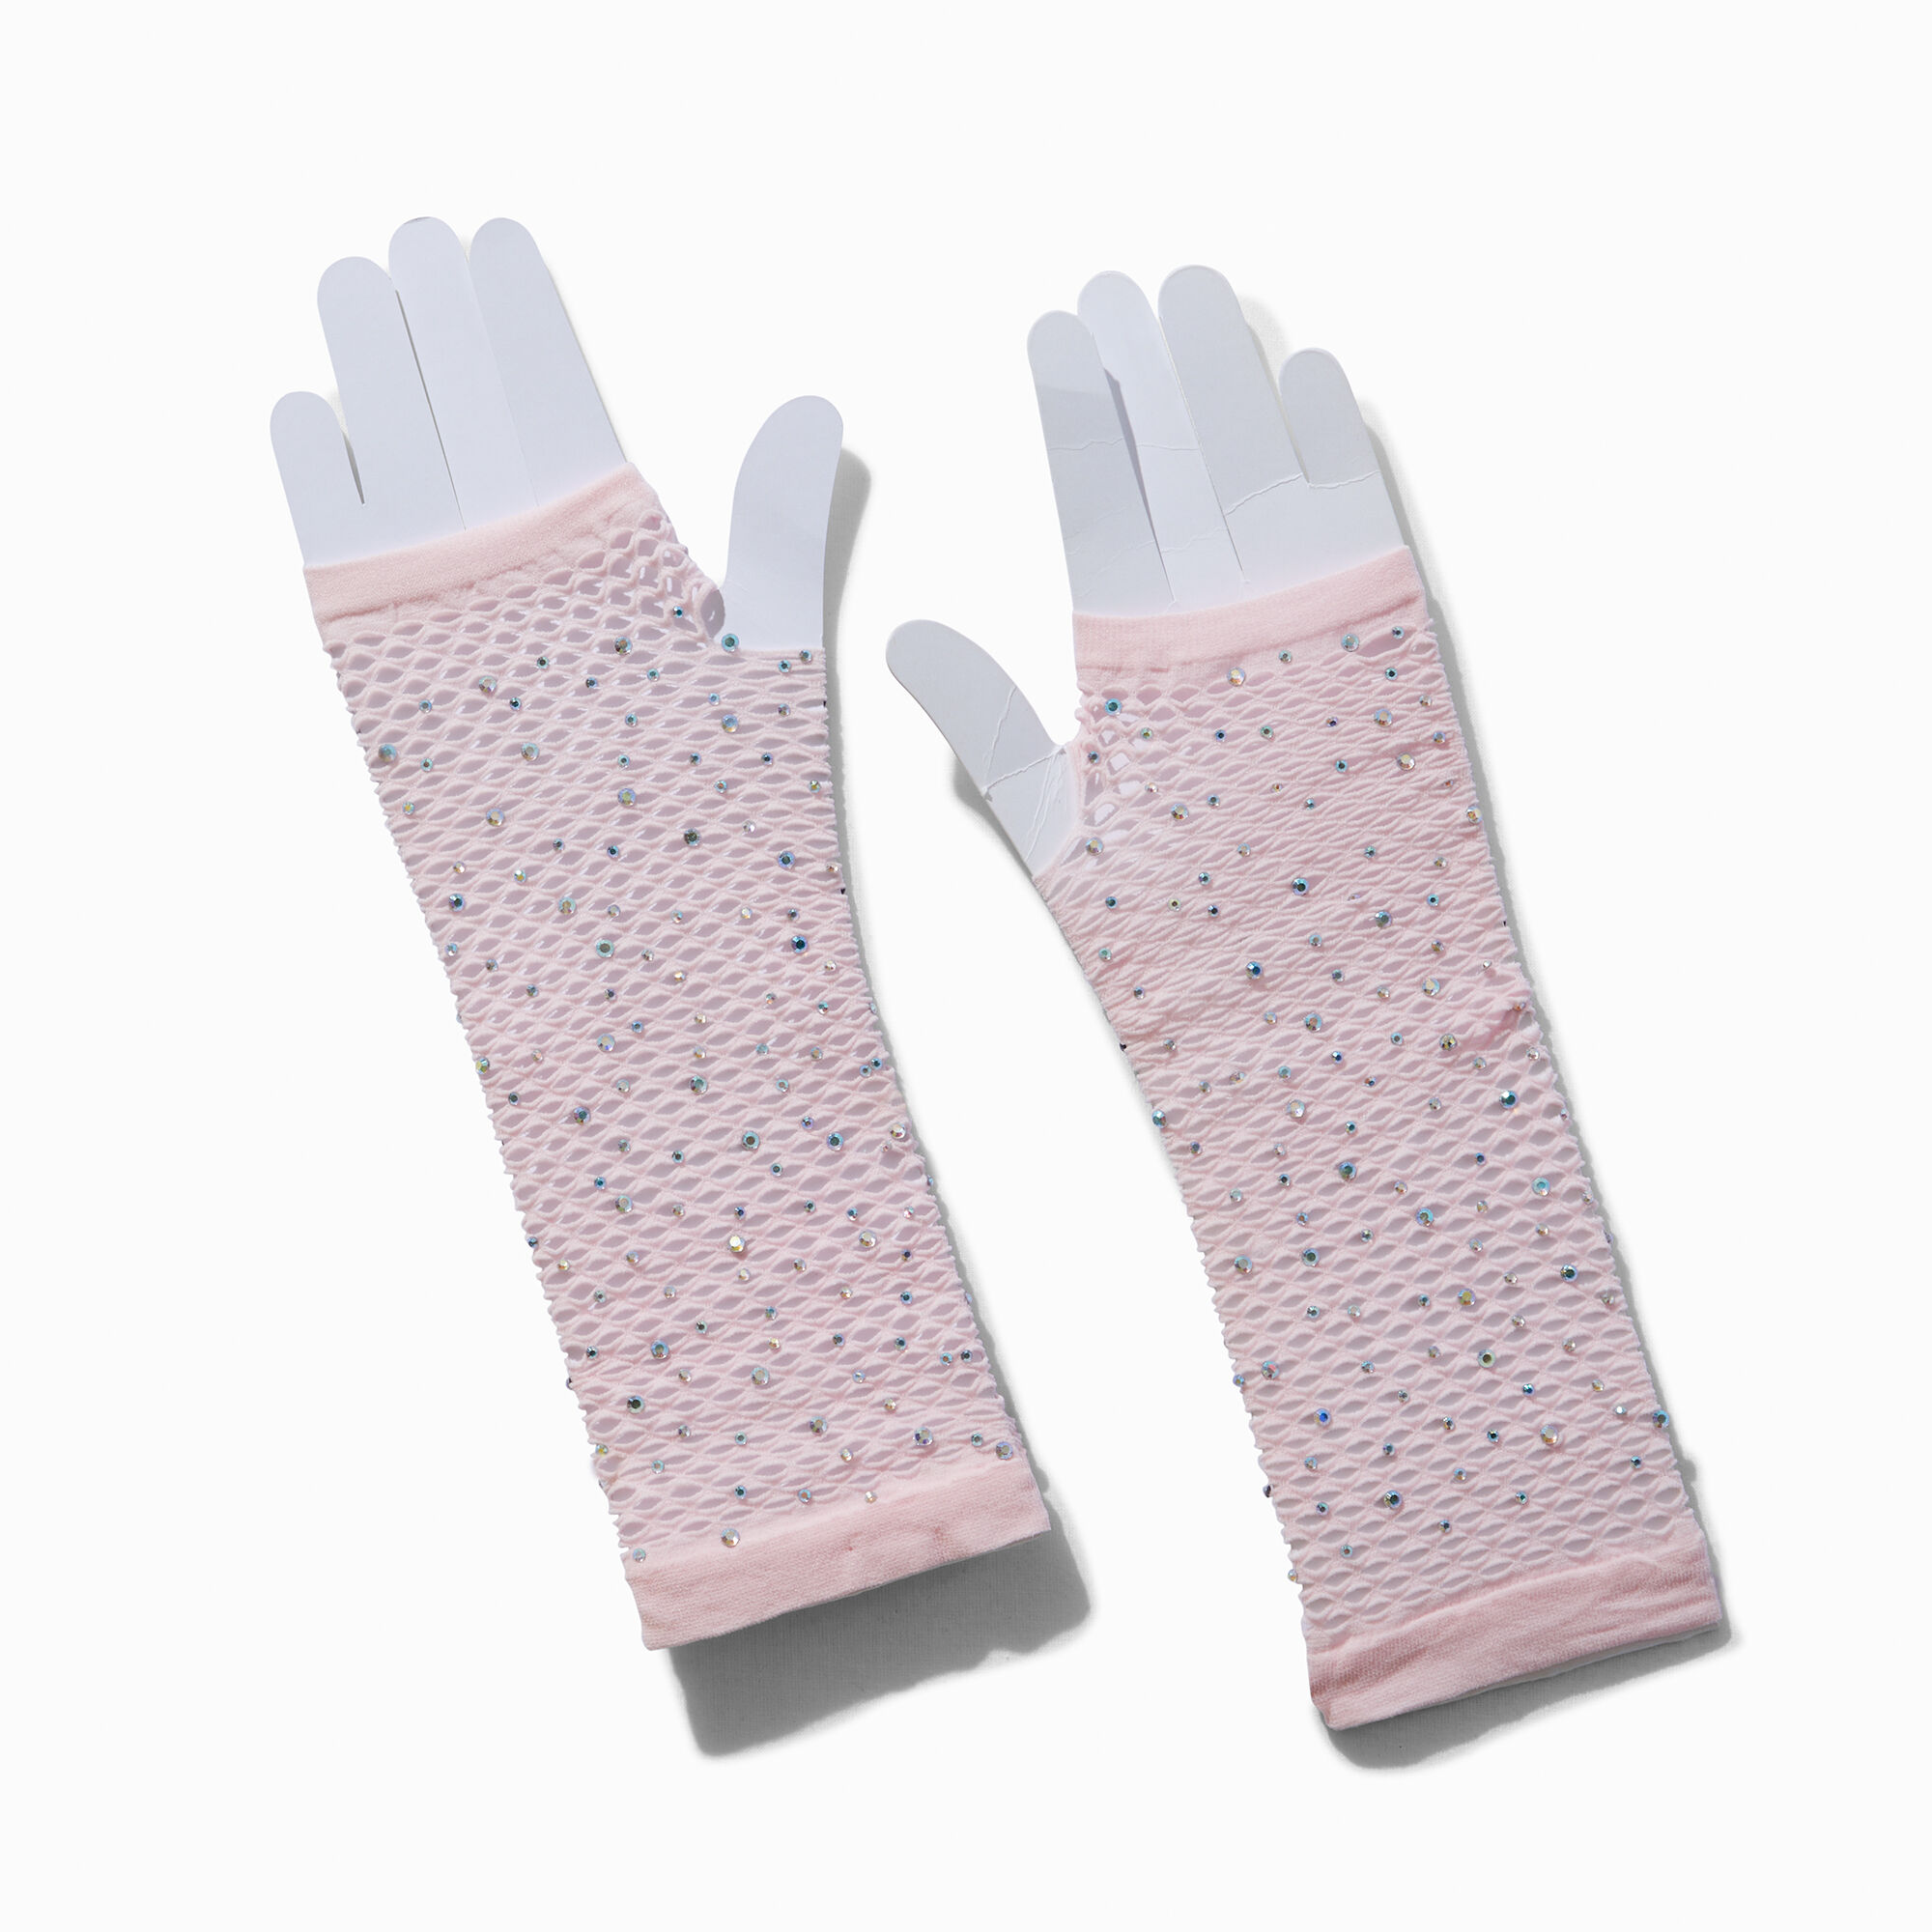 View Claires RhinestoneStudded Fishnet Arm Warmers Pink information